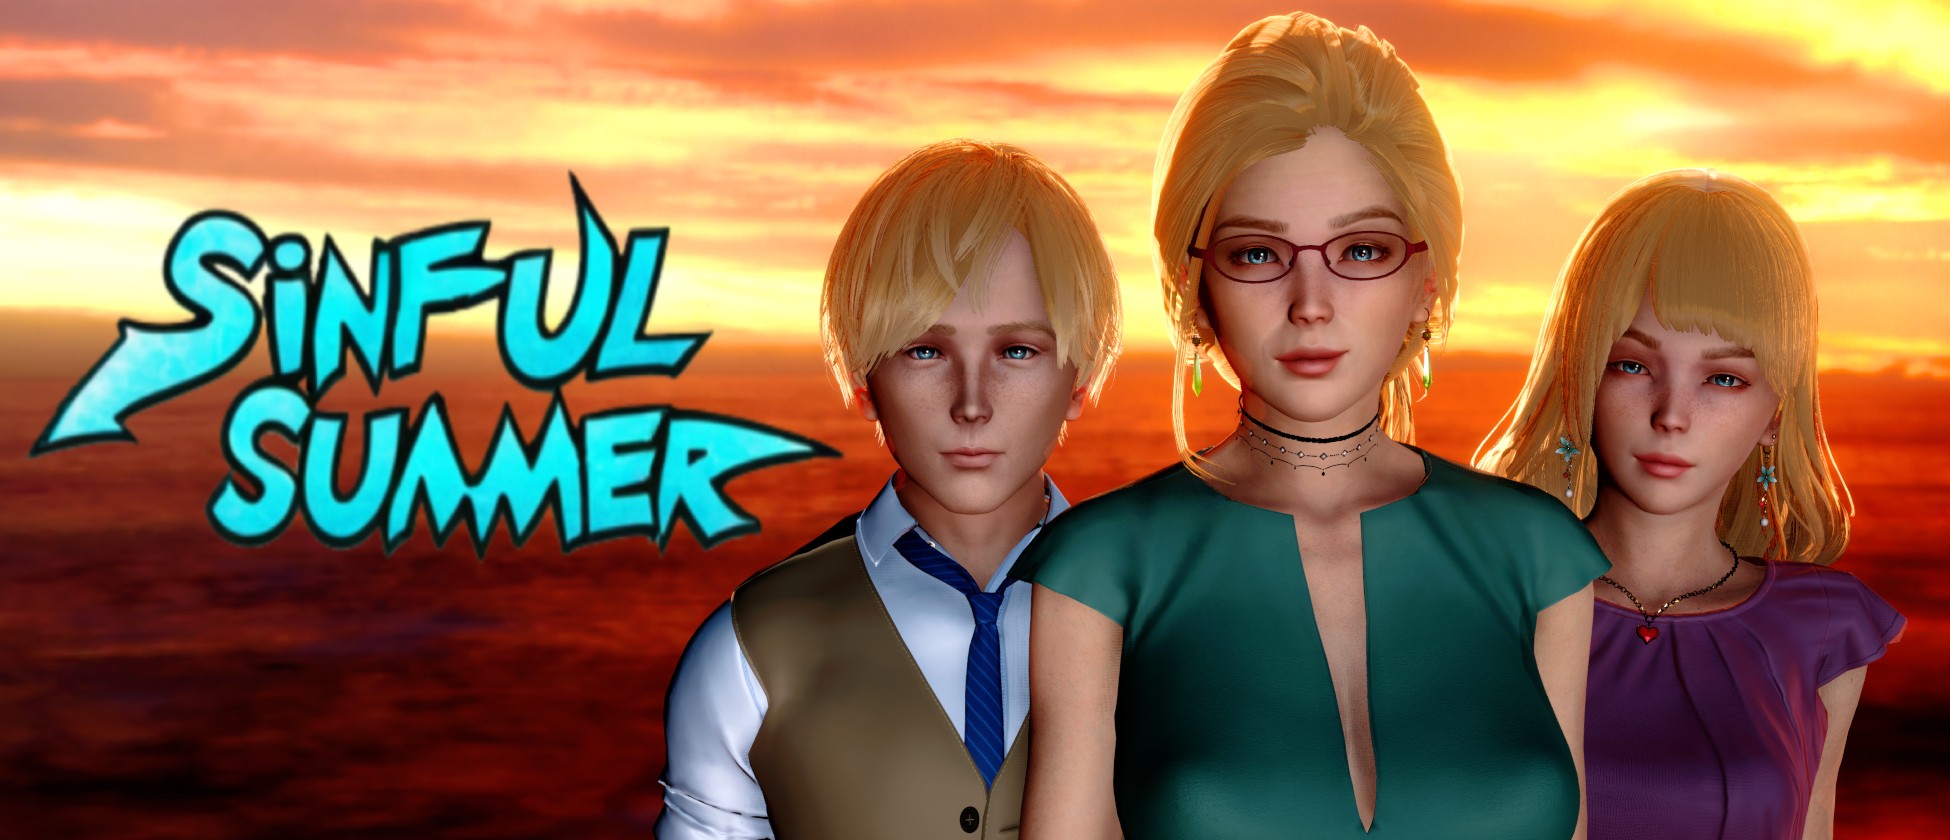 Sinful Summer Android Adult Game Download (2)